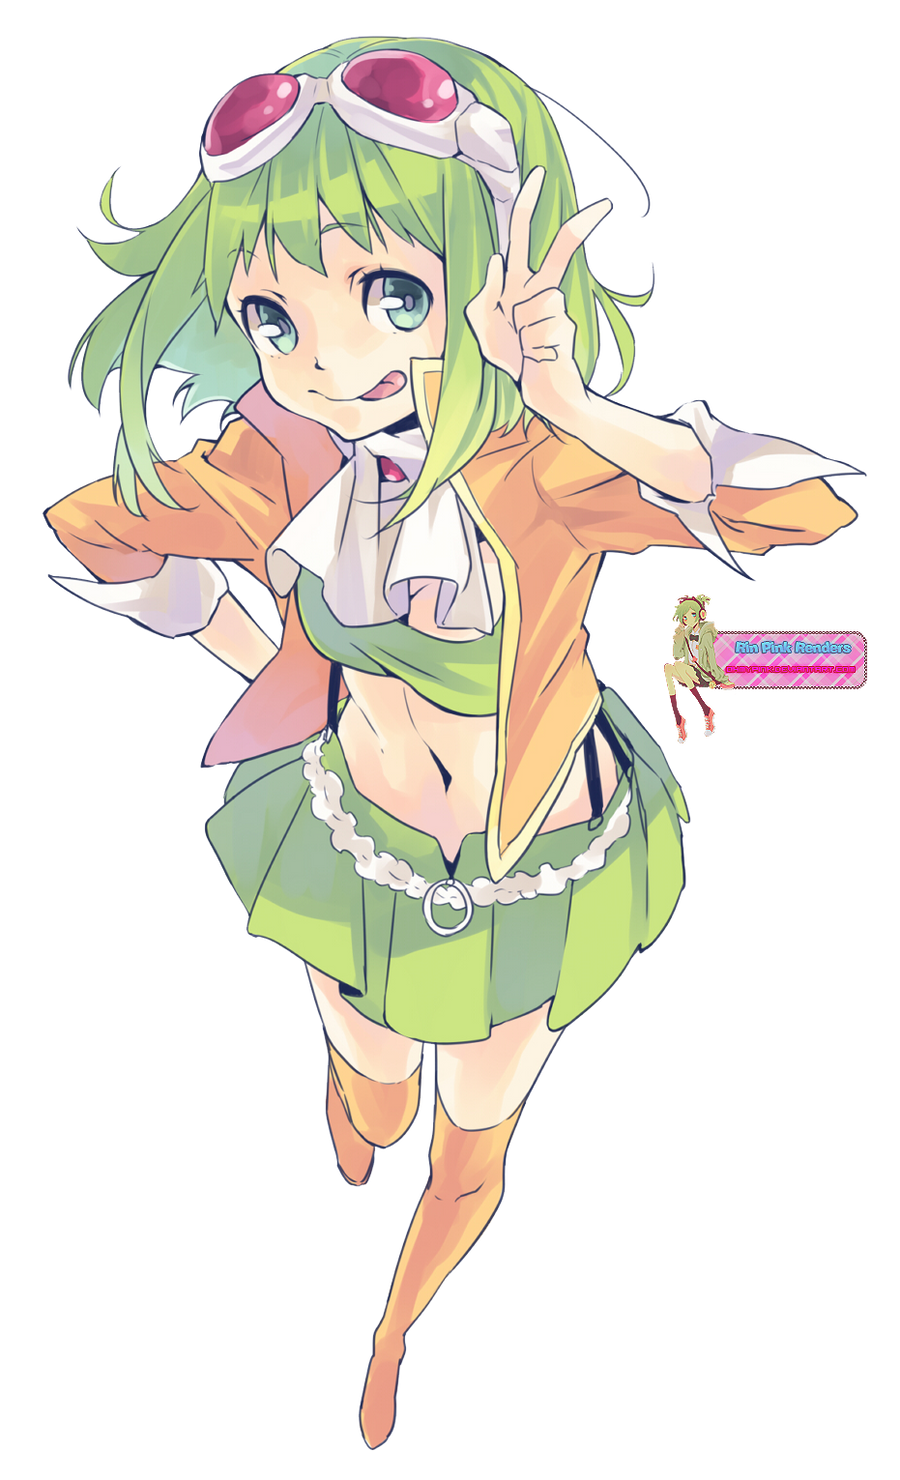 _render__gumi_megpoid____by_ohmypink-d5wucea.png